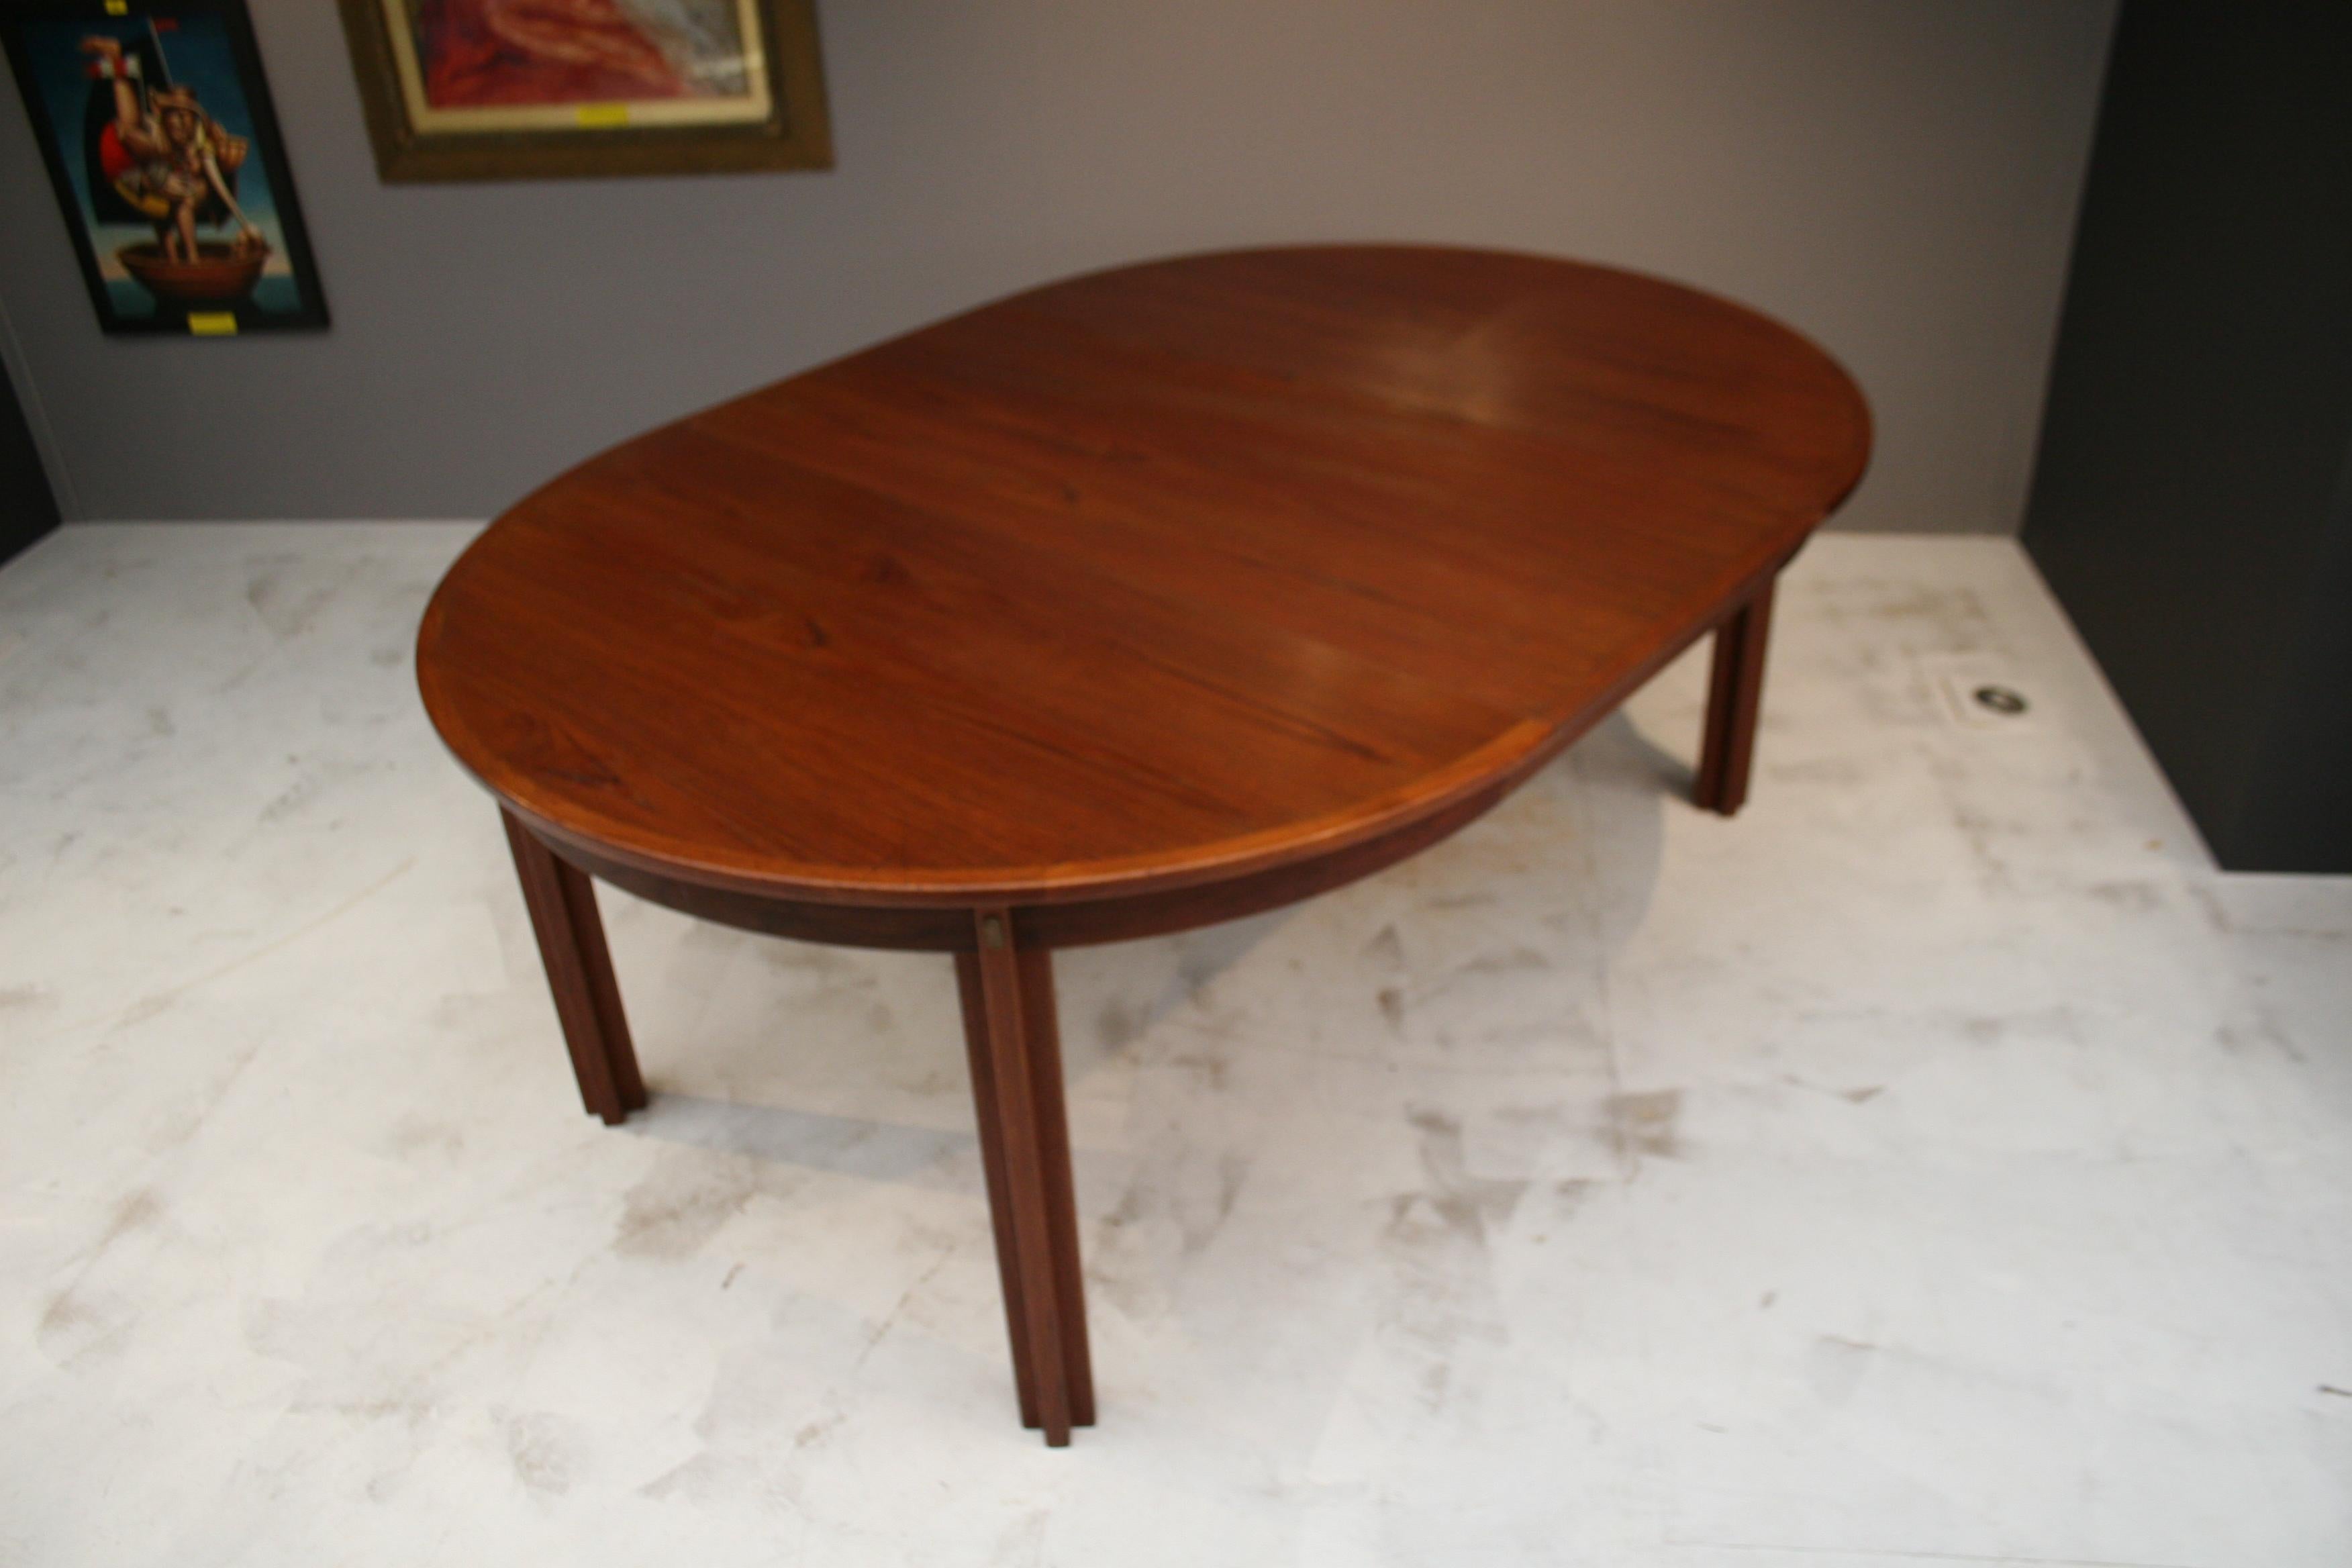 Borge Mogensen Teak Dining Table with Extension Leaf c1950 In Good Condition For Sale In London, GB